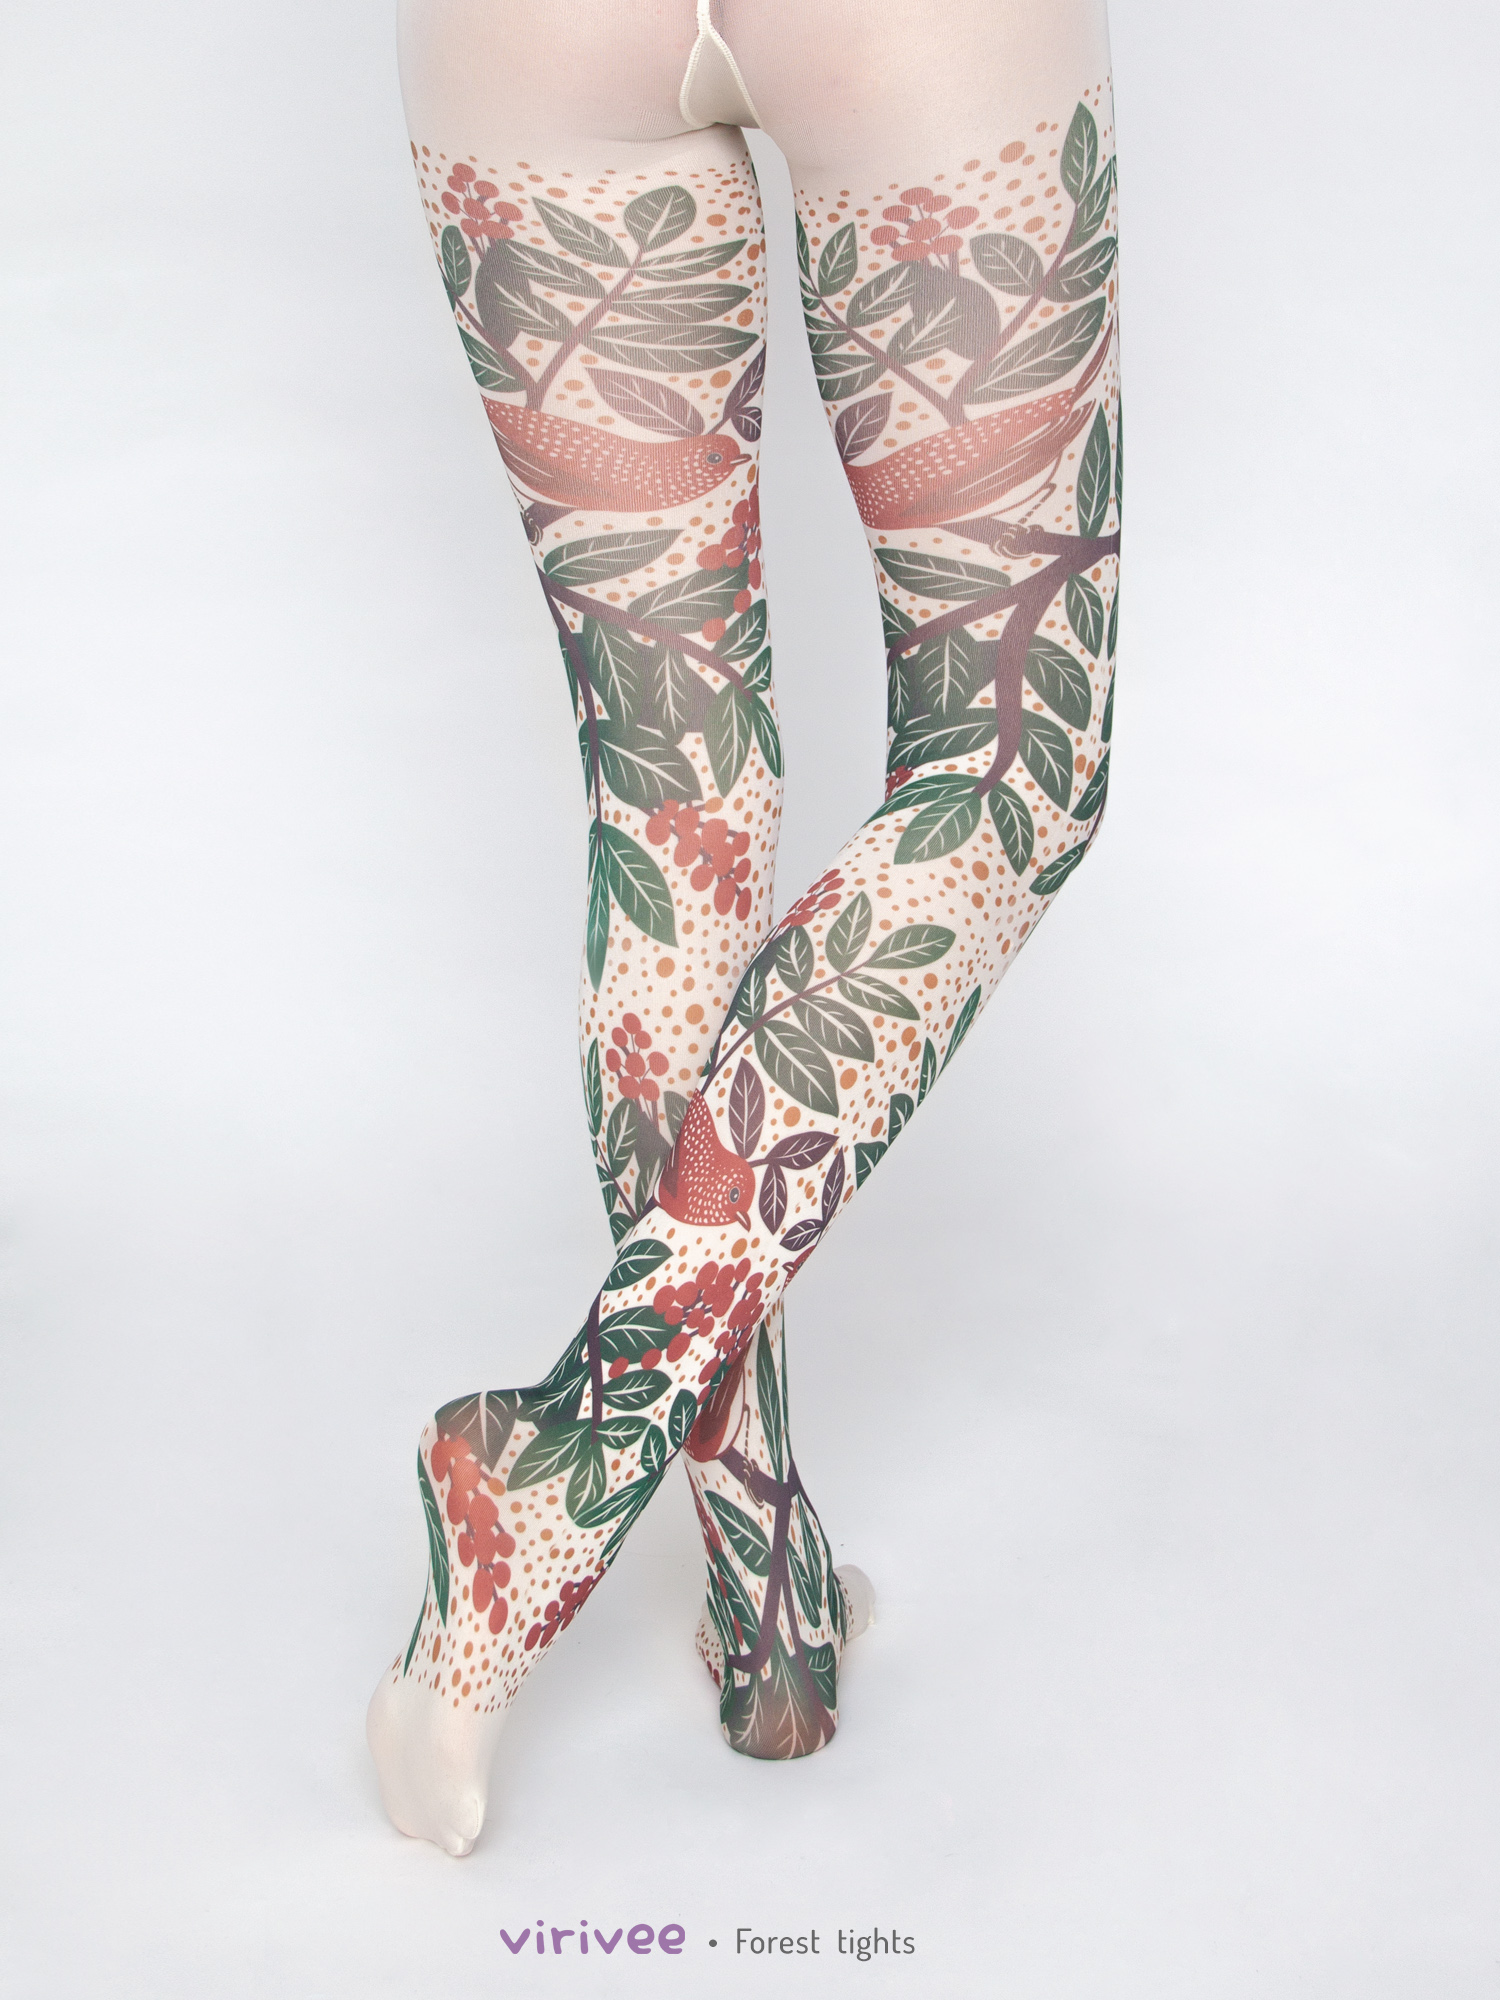 Colorful forest tights - Virivee Tights - Unique tights designed